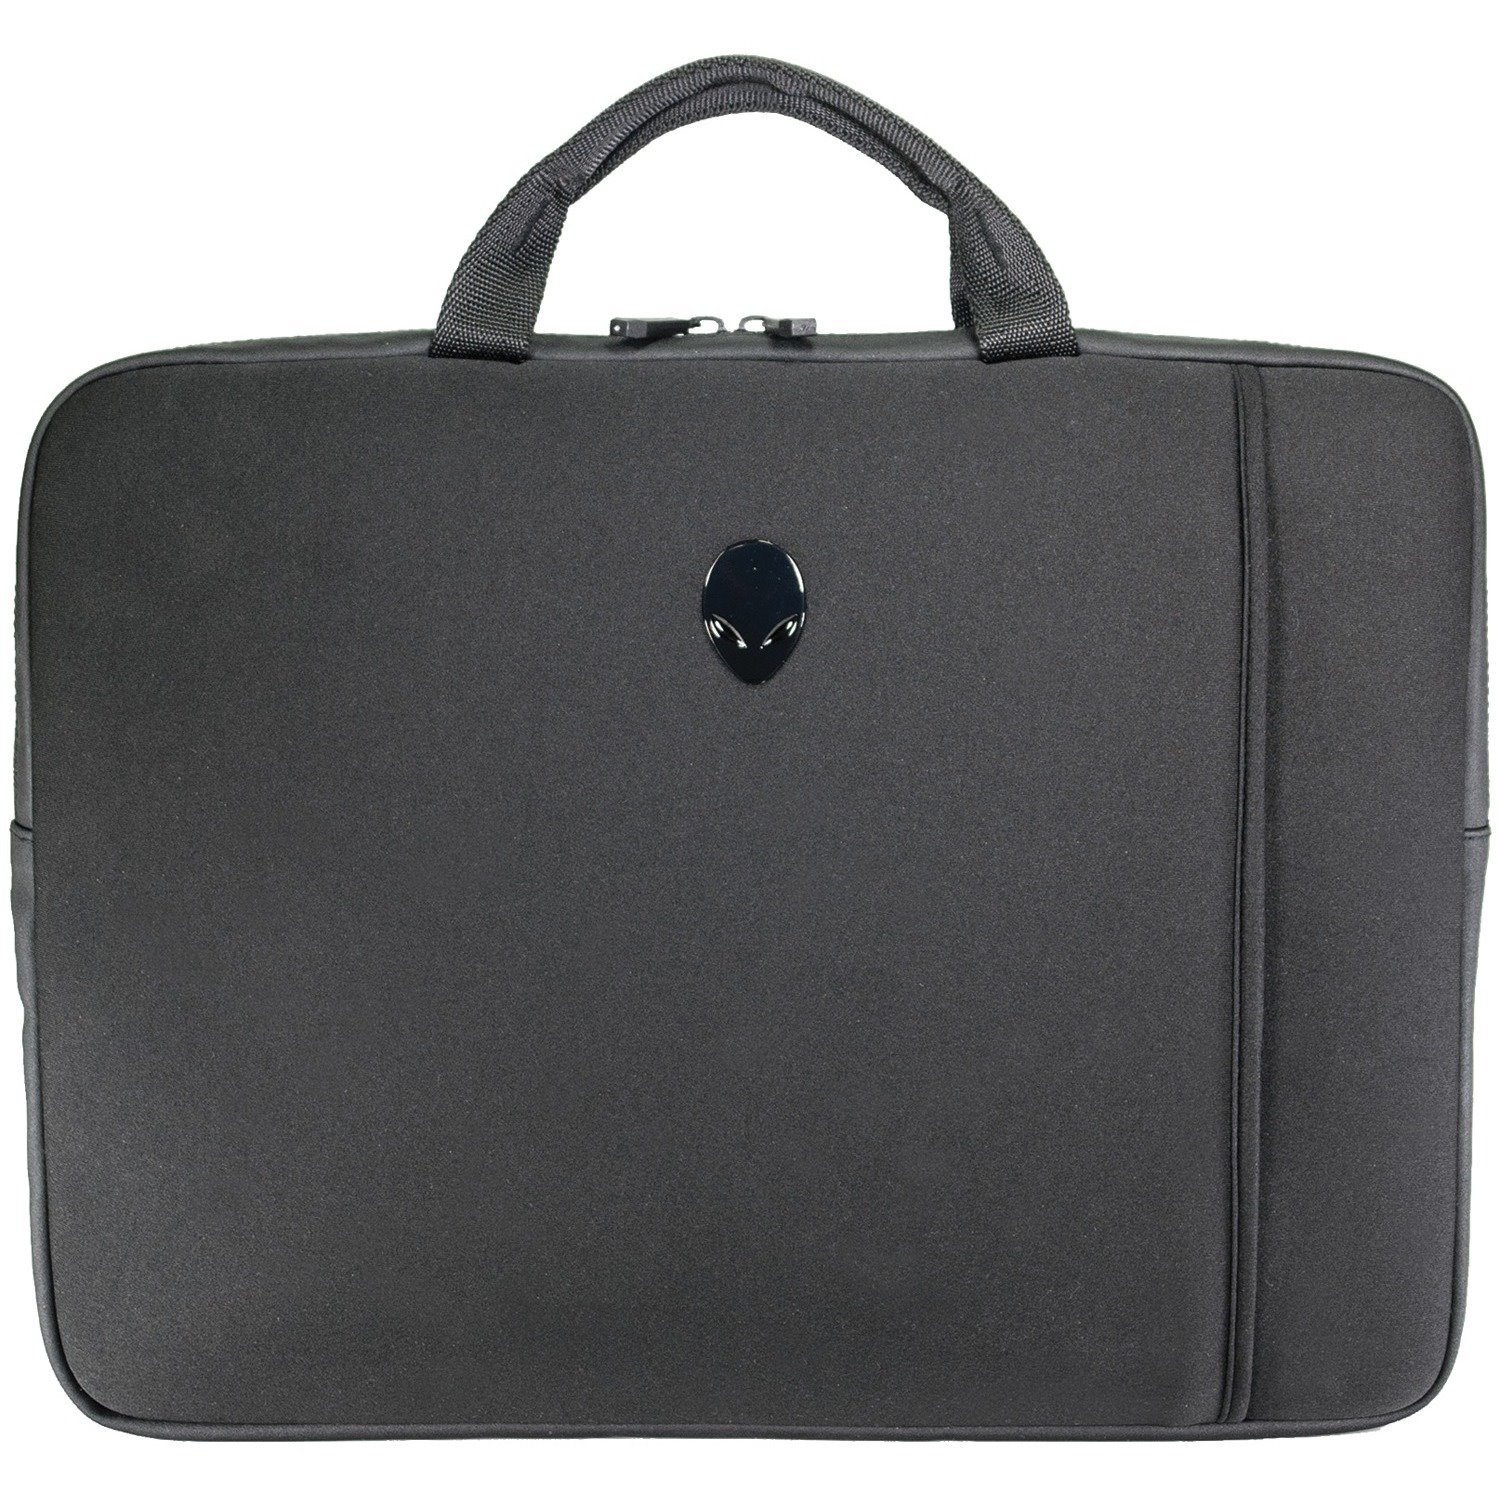 Mobile Edge AWM15SL Carrying Case (Sleeve) for 15" Dell Notebook - Black